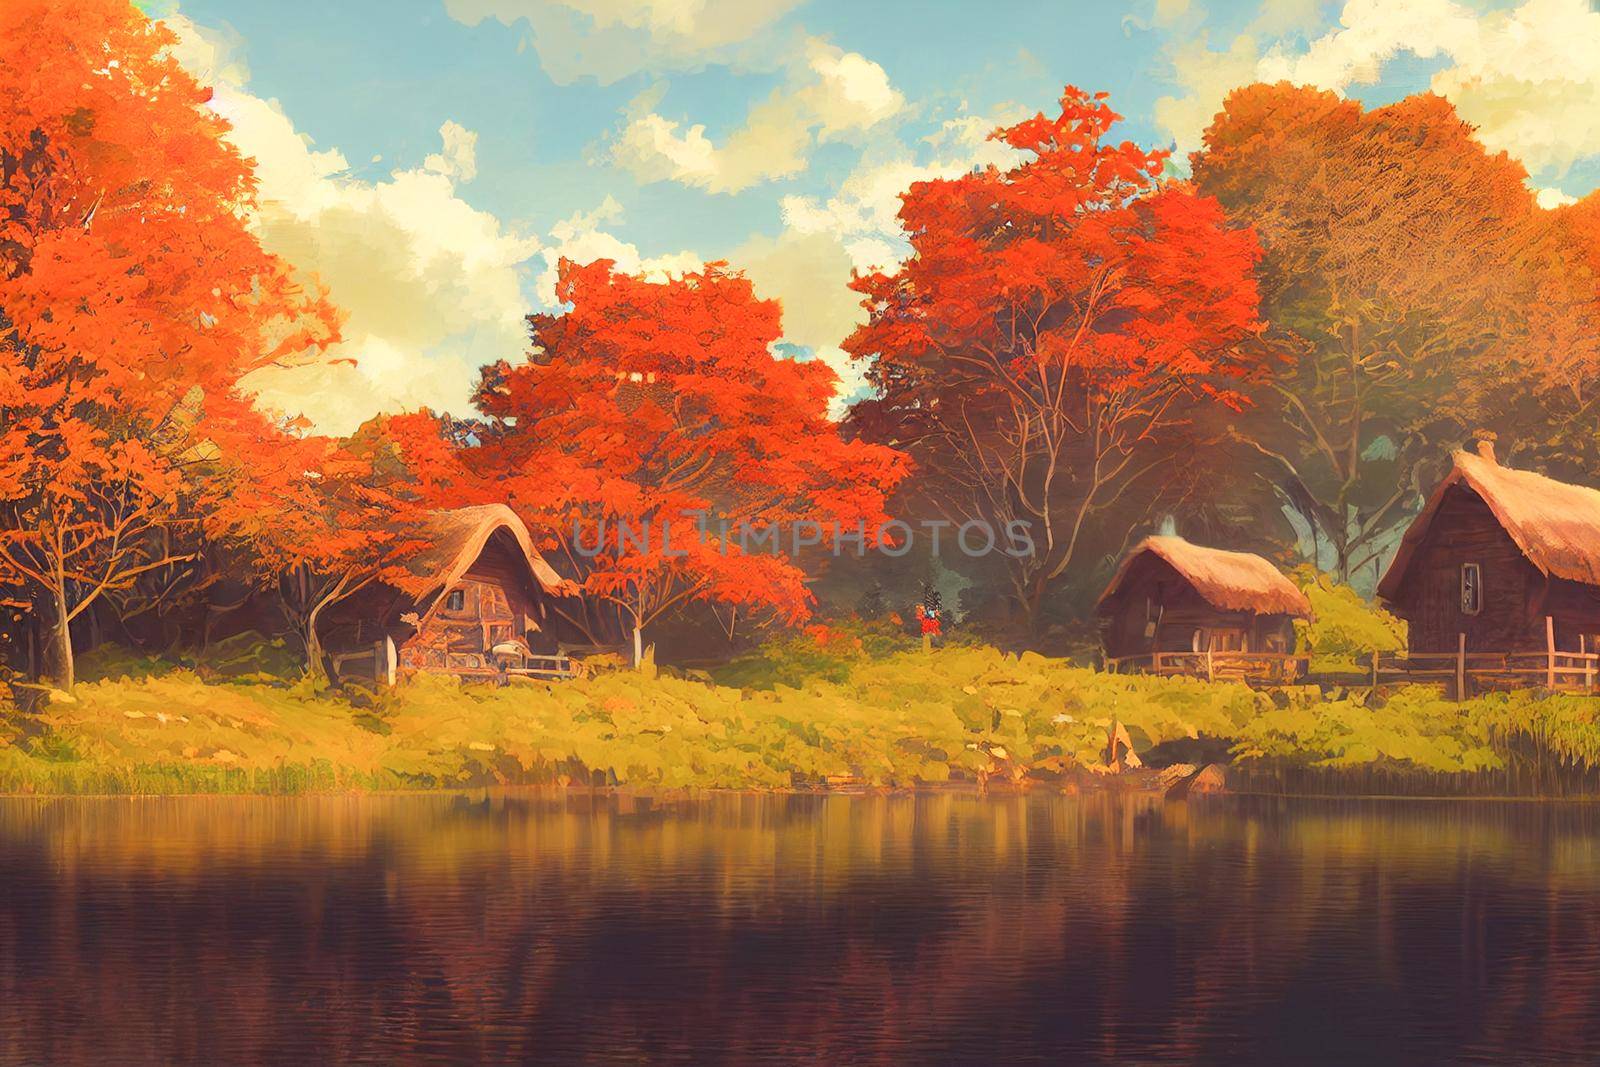 3D render digital painting of cabin near a river in the redwood forest by FokasuArt